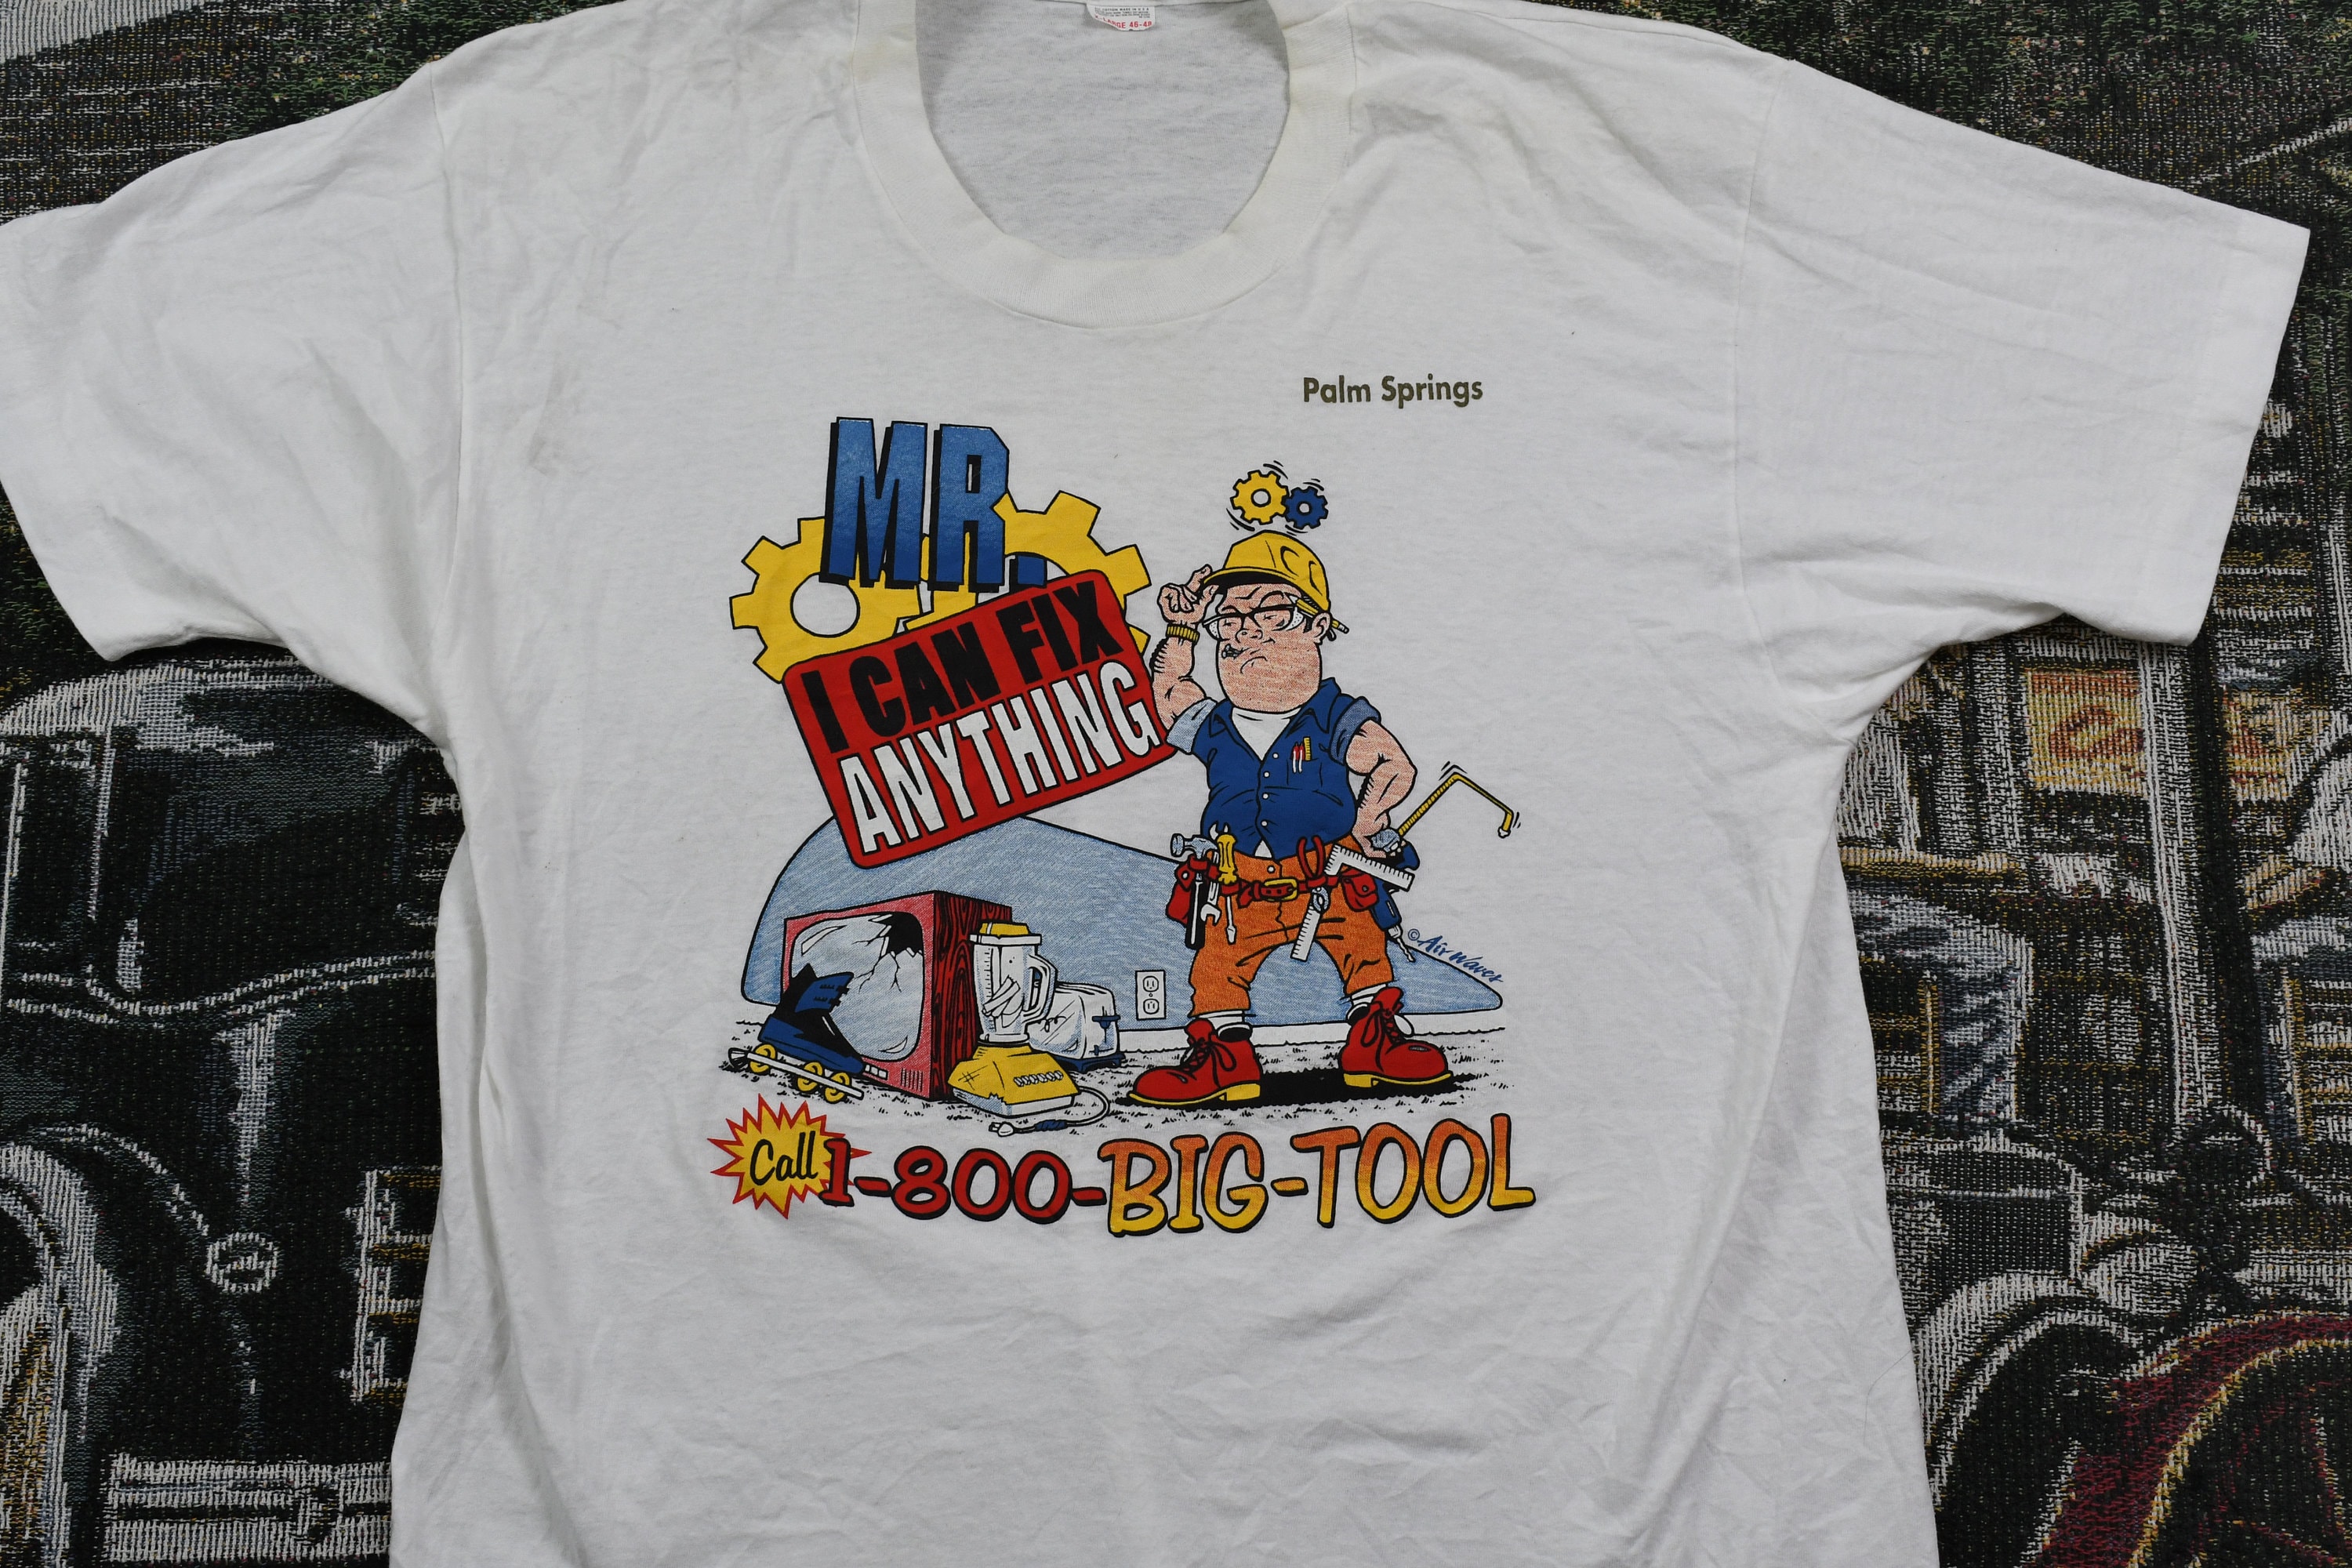 Vintage T-Shirt  Mr I Can Fix Anything  Big Tool Graphic  80s  90s  Streetwear Fashion  Made In USA  Palm Springs Travel & Tourism